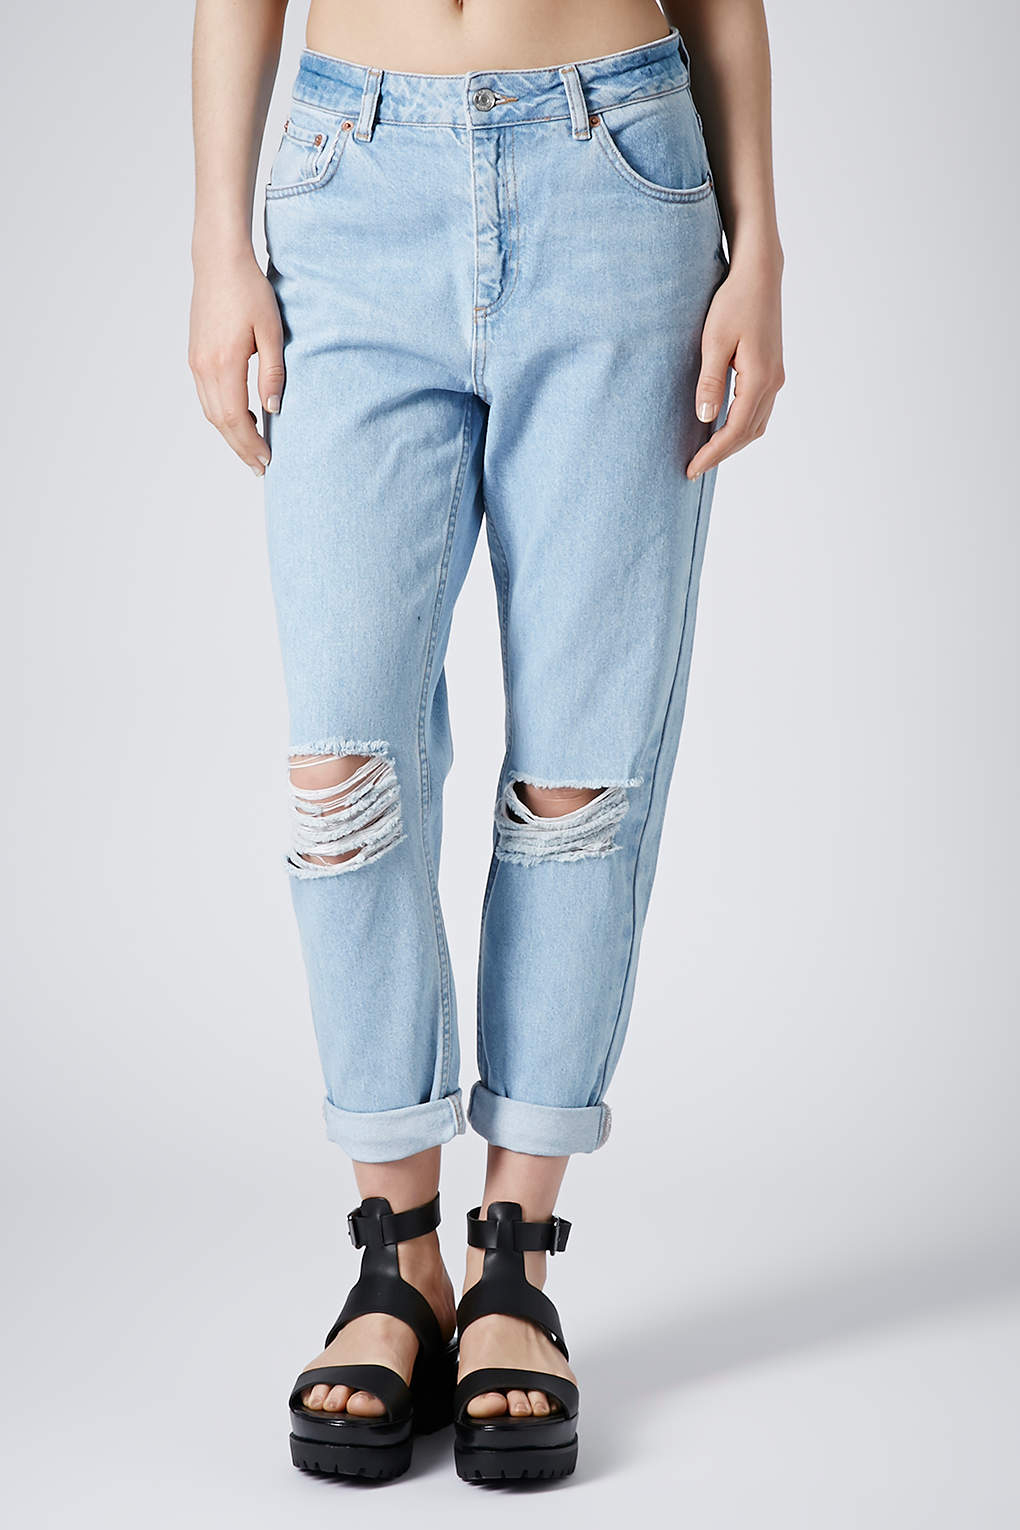 Lyst Moto Blue Ripped Mom Jeans in Blue